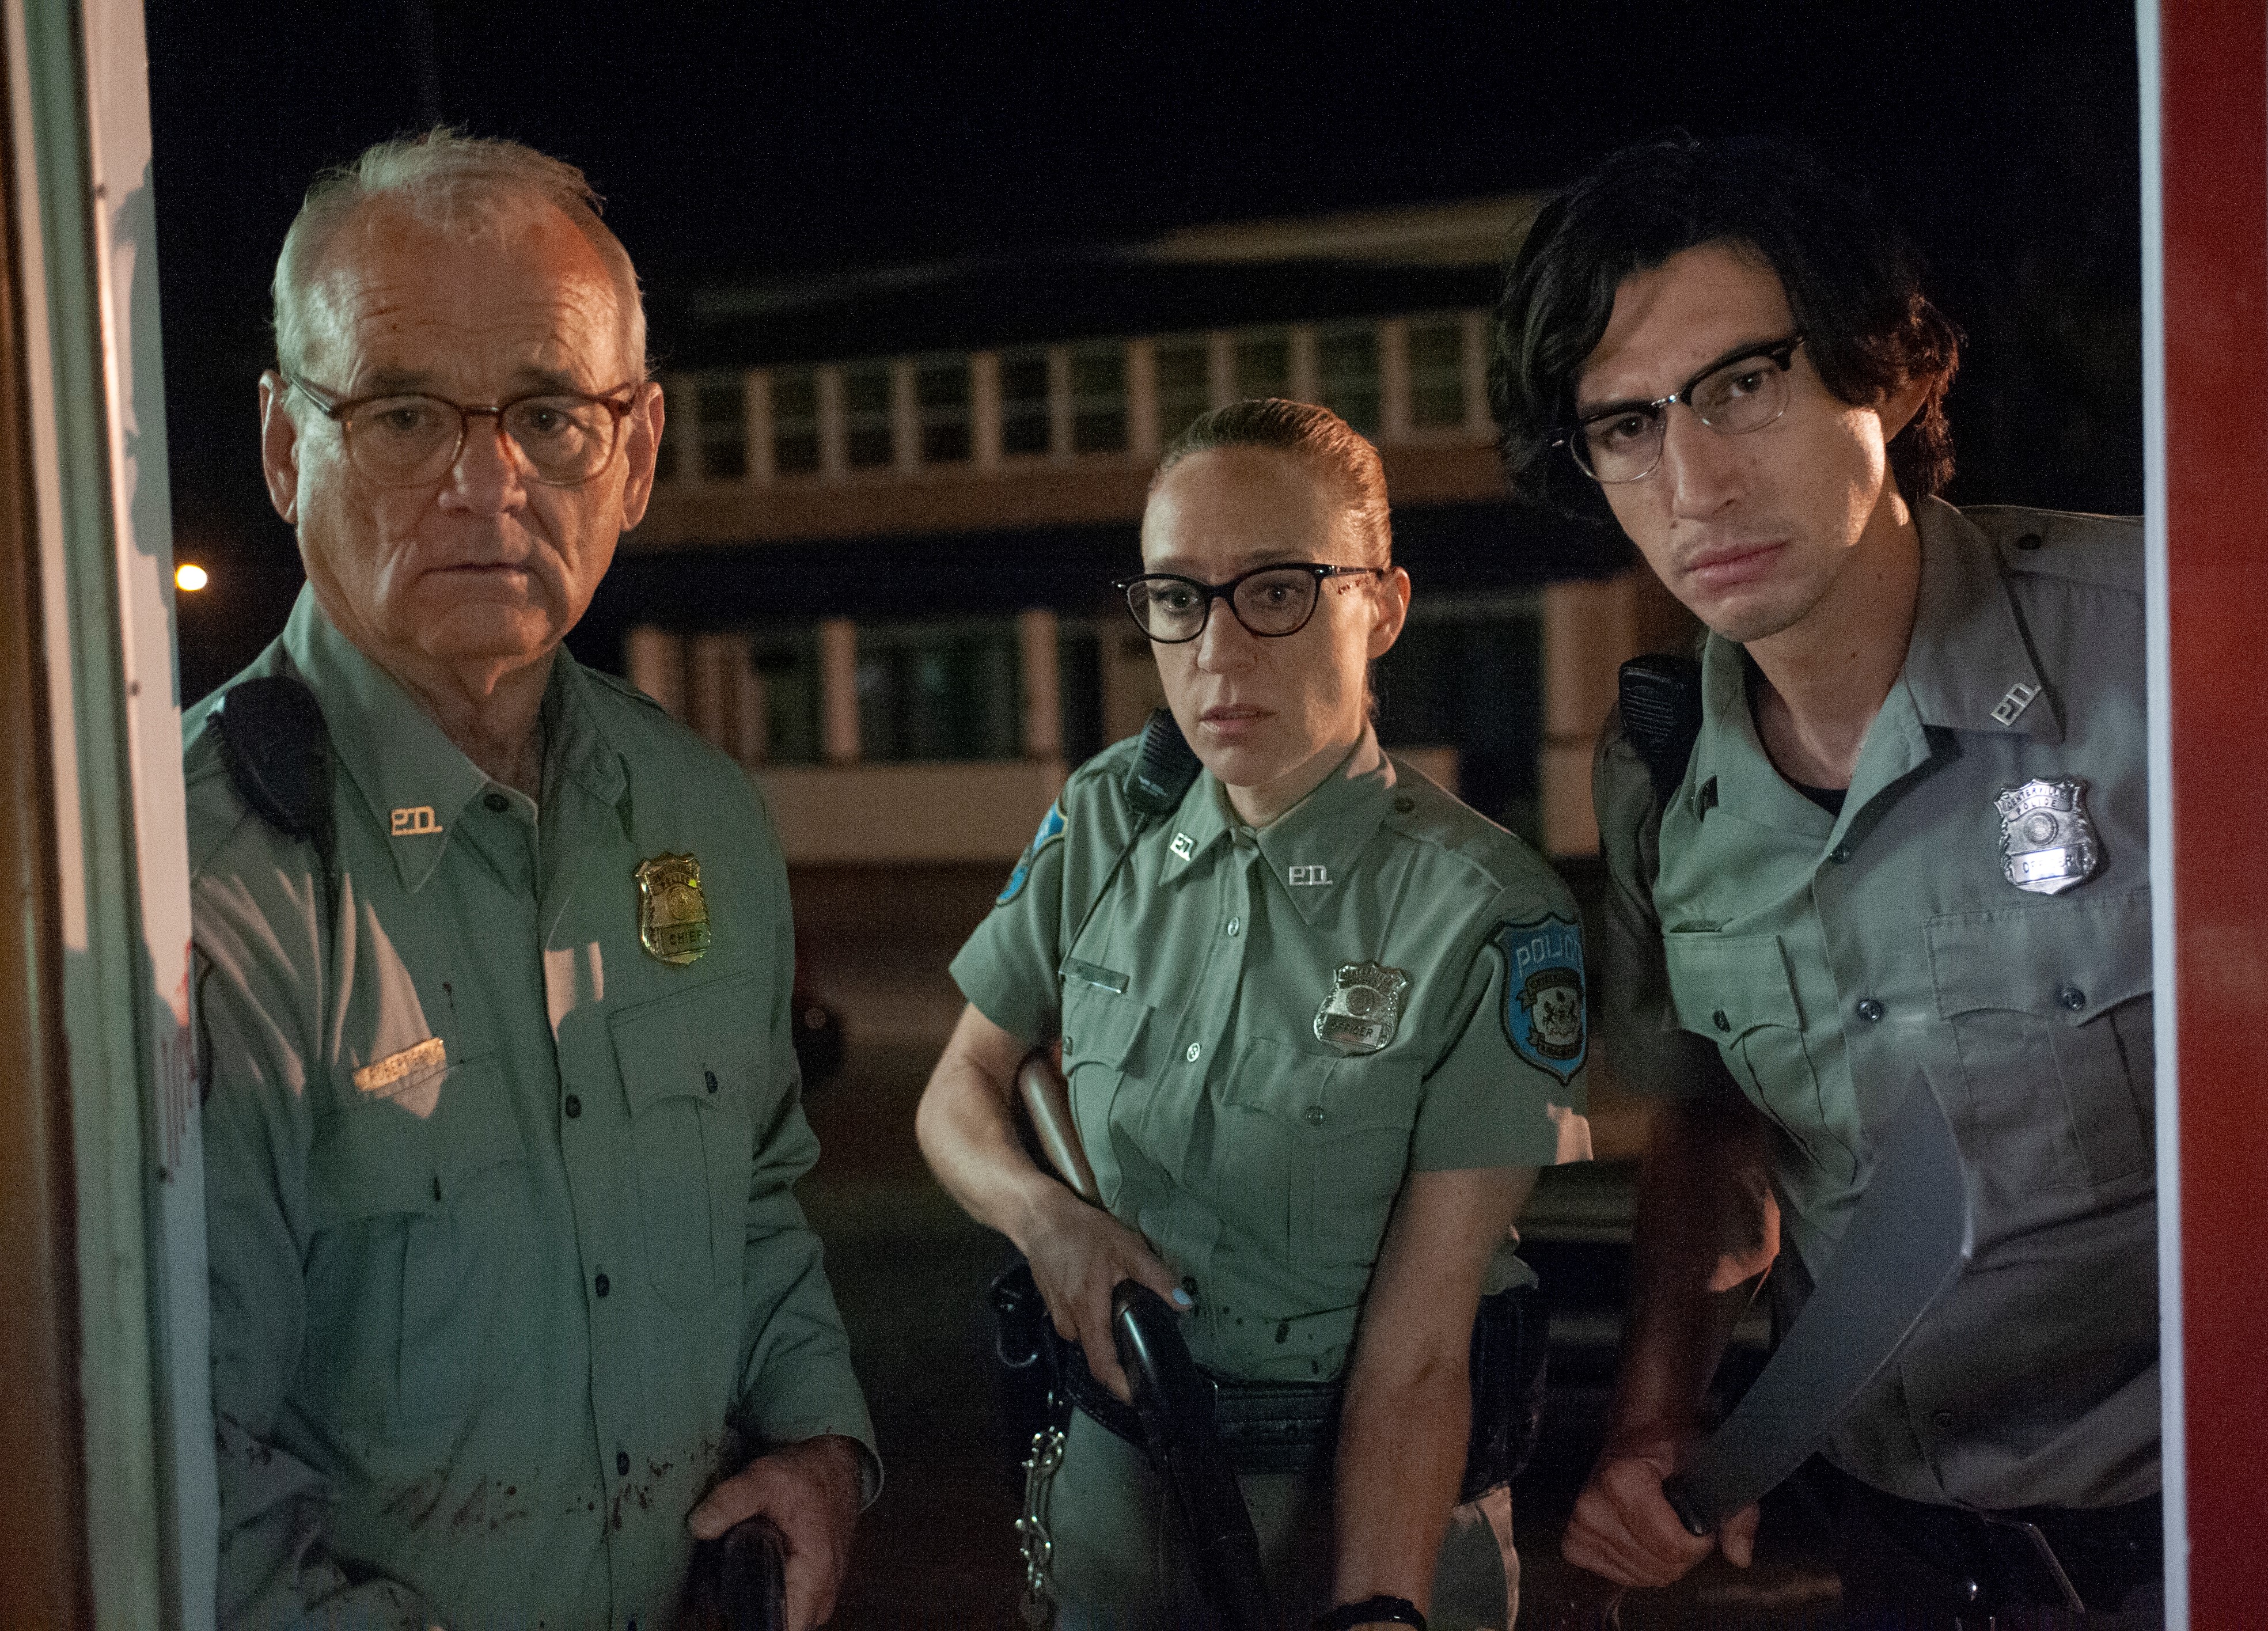 In 'The Dead Don't Die' (l. to r.) Centerville's Police Department is composed of Bill Murray as Officer Cliff Robertson, Chloë Sevigny as Officer Minerva Morrison and Adam Driver as Officer Ronald Peterson.